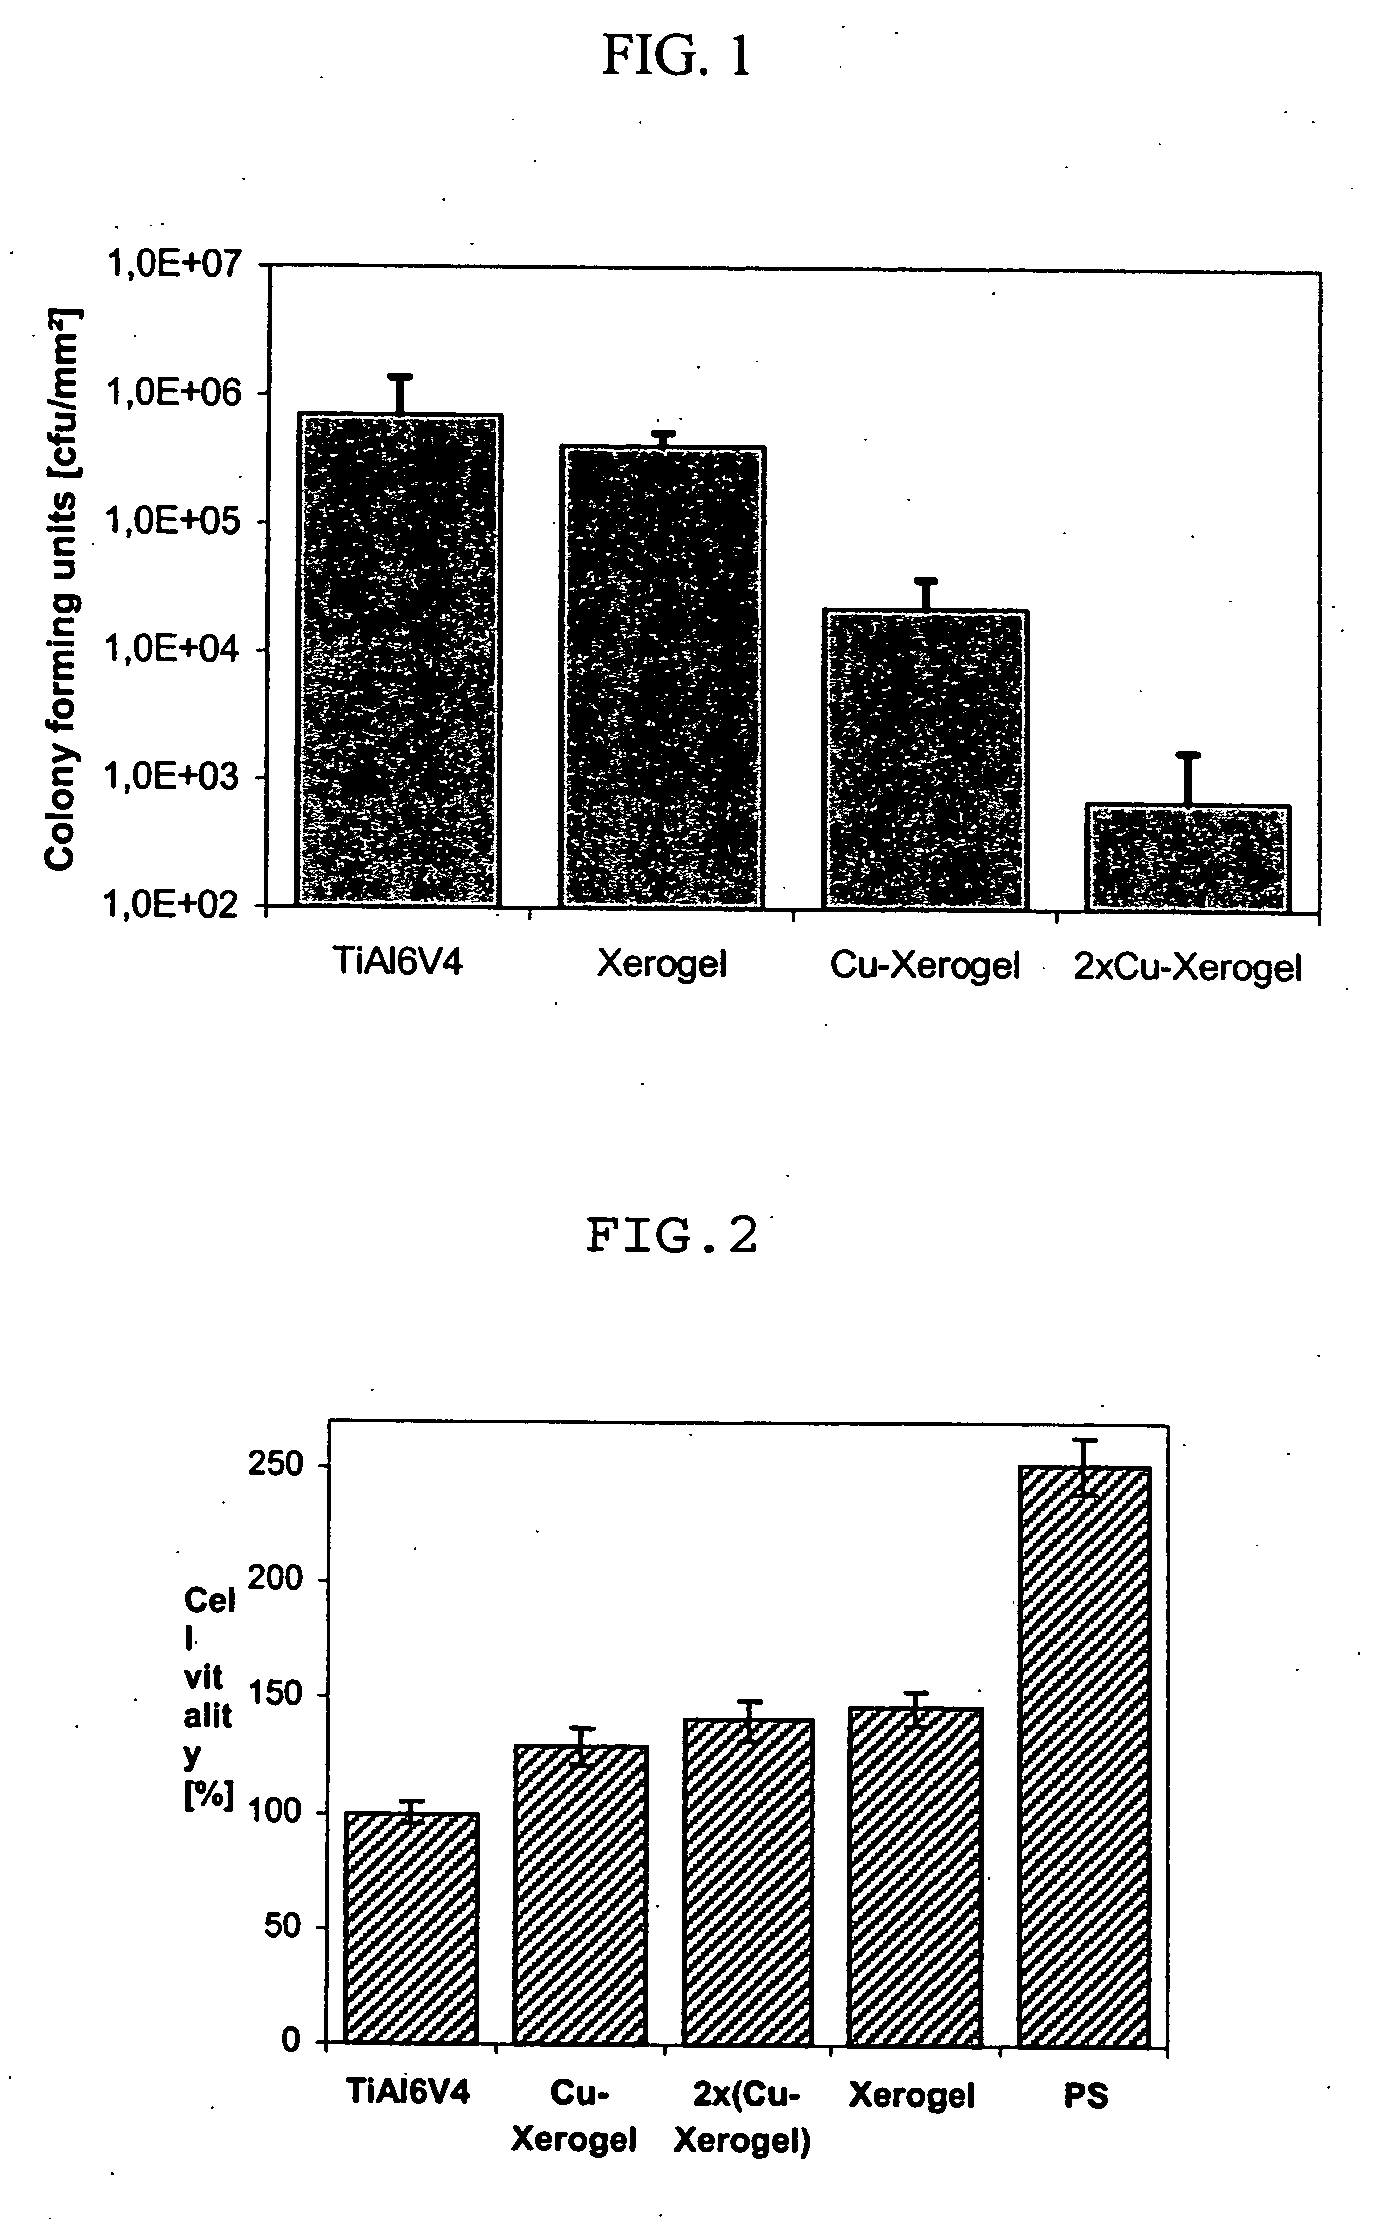 Anti-infectious, biocompatible titanium coating for implants, and method for the production thereof